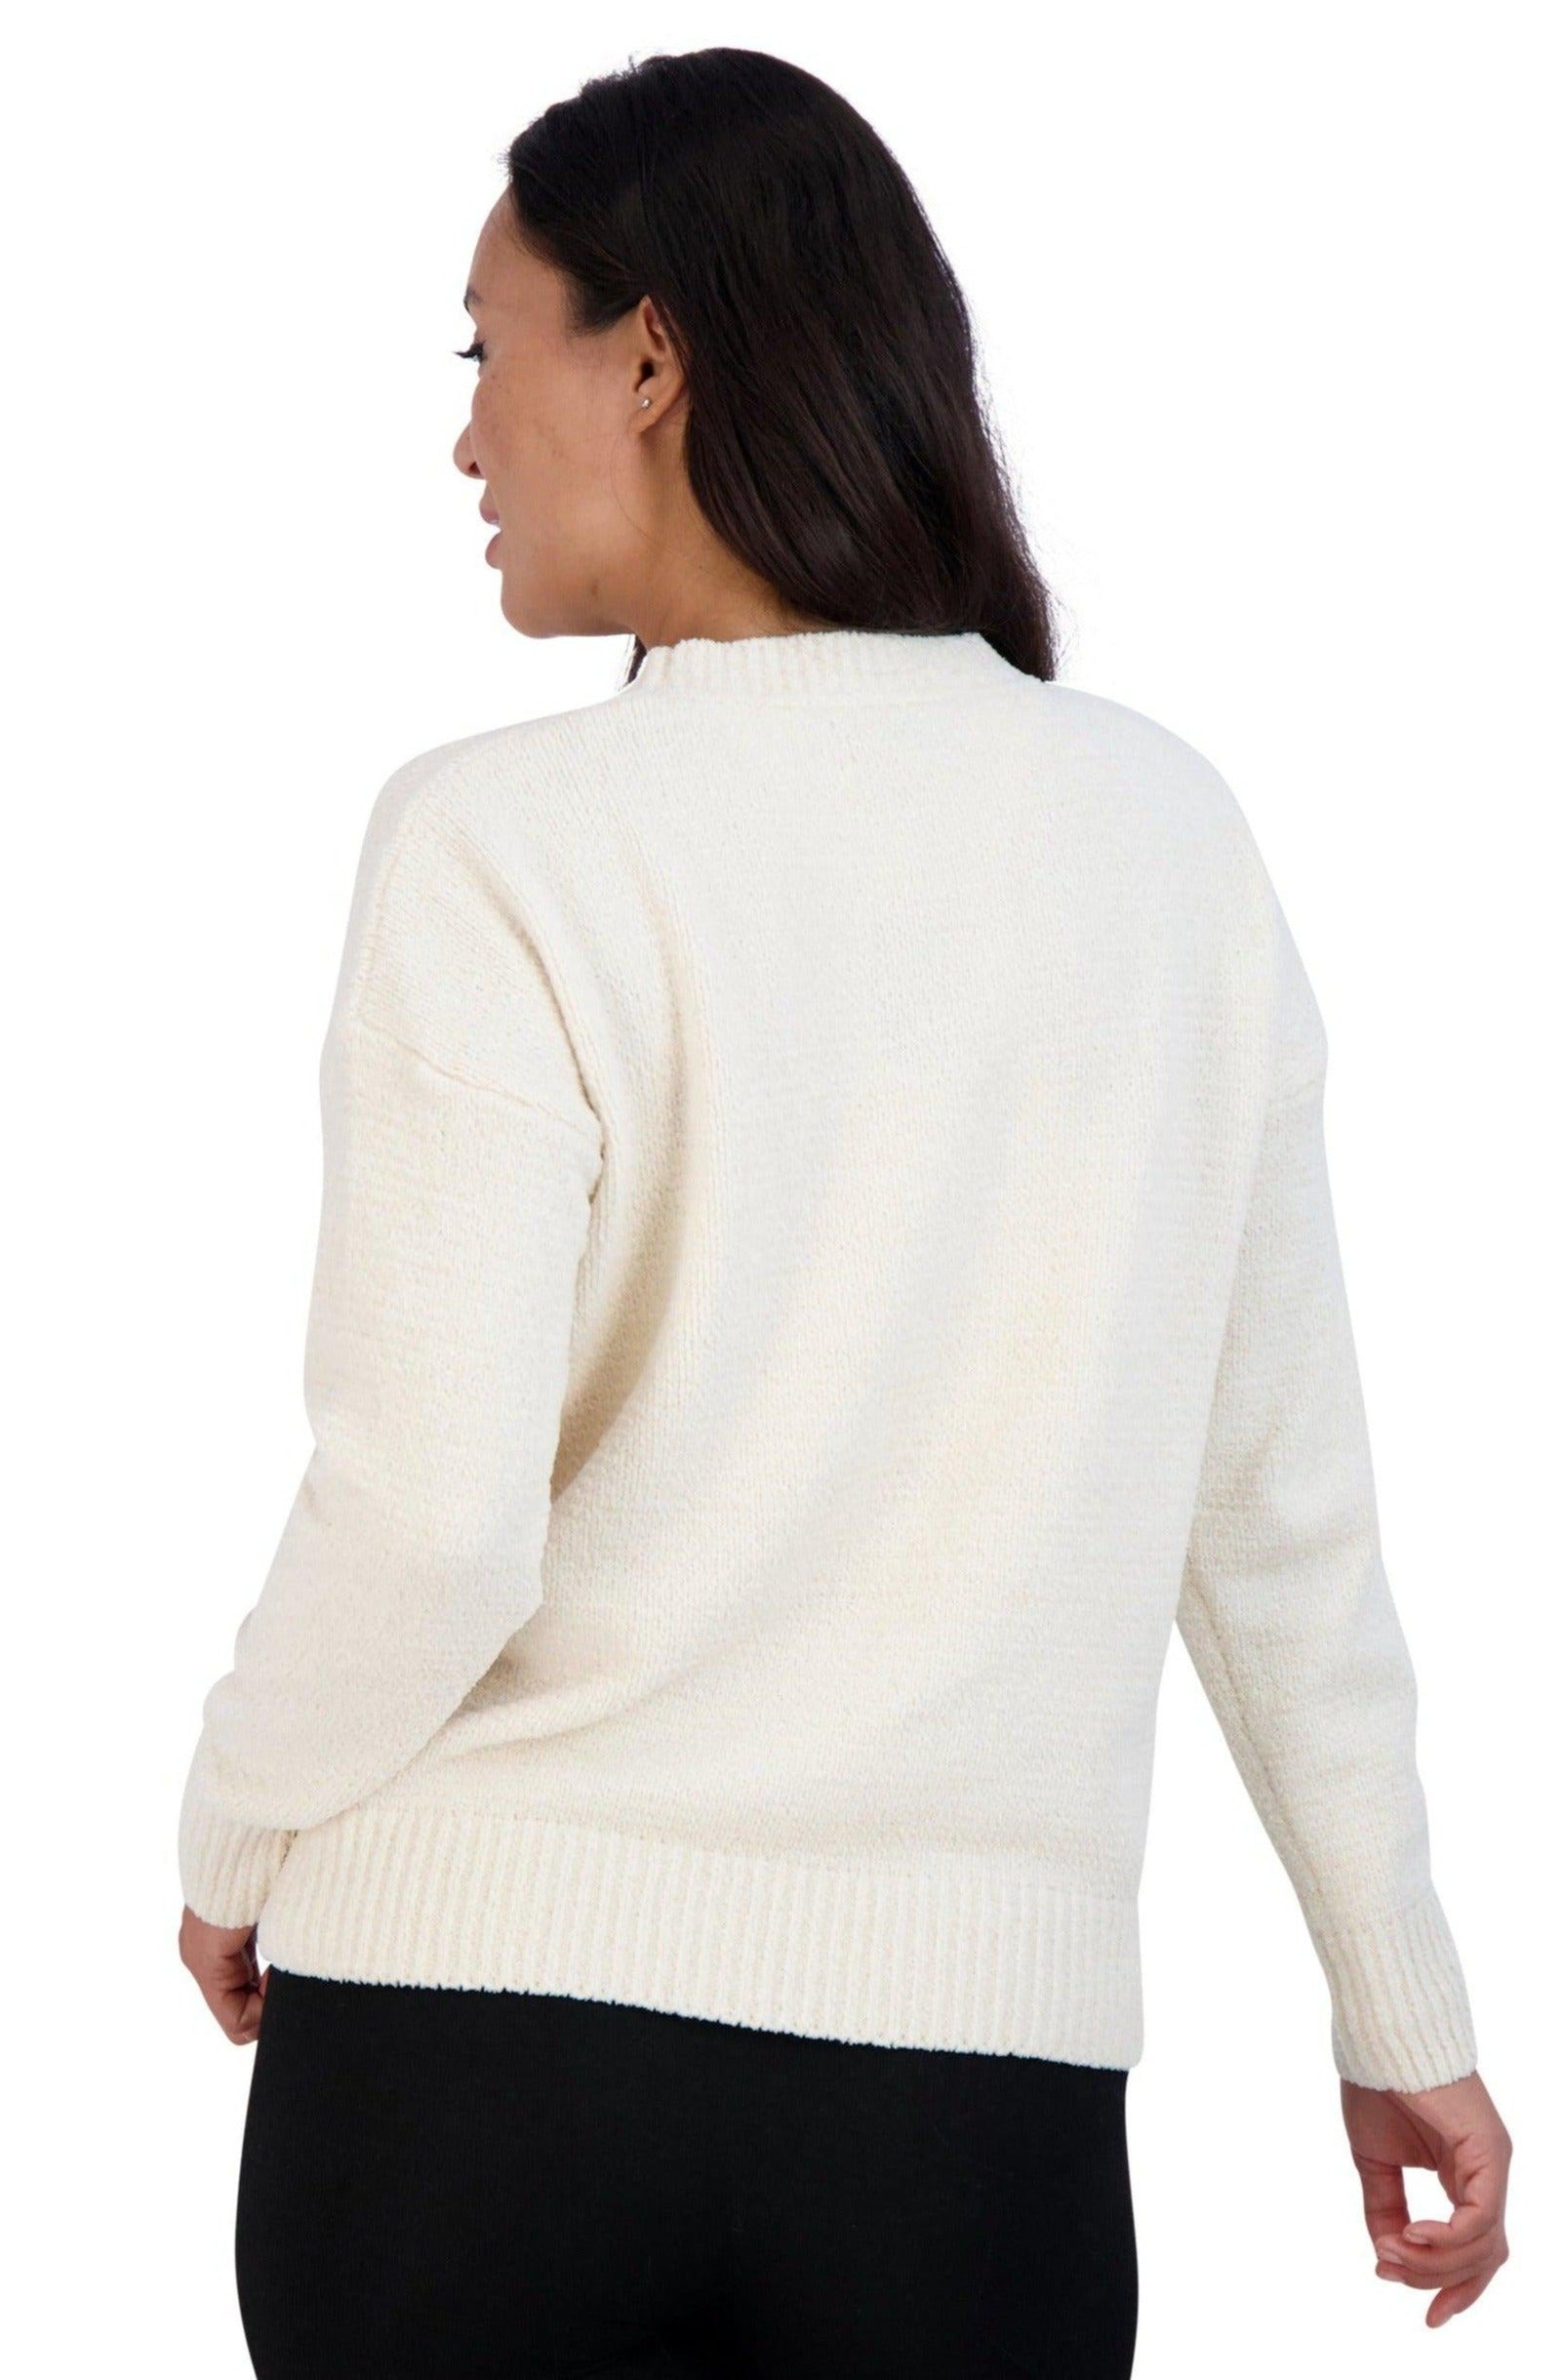 Women's Embroidered "COZY" Chenille Sweater - Rae Dunn Wear